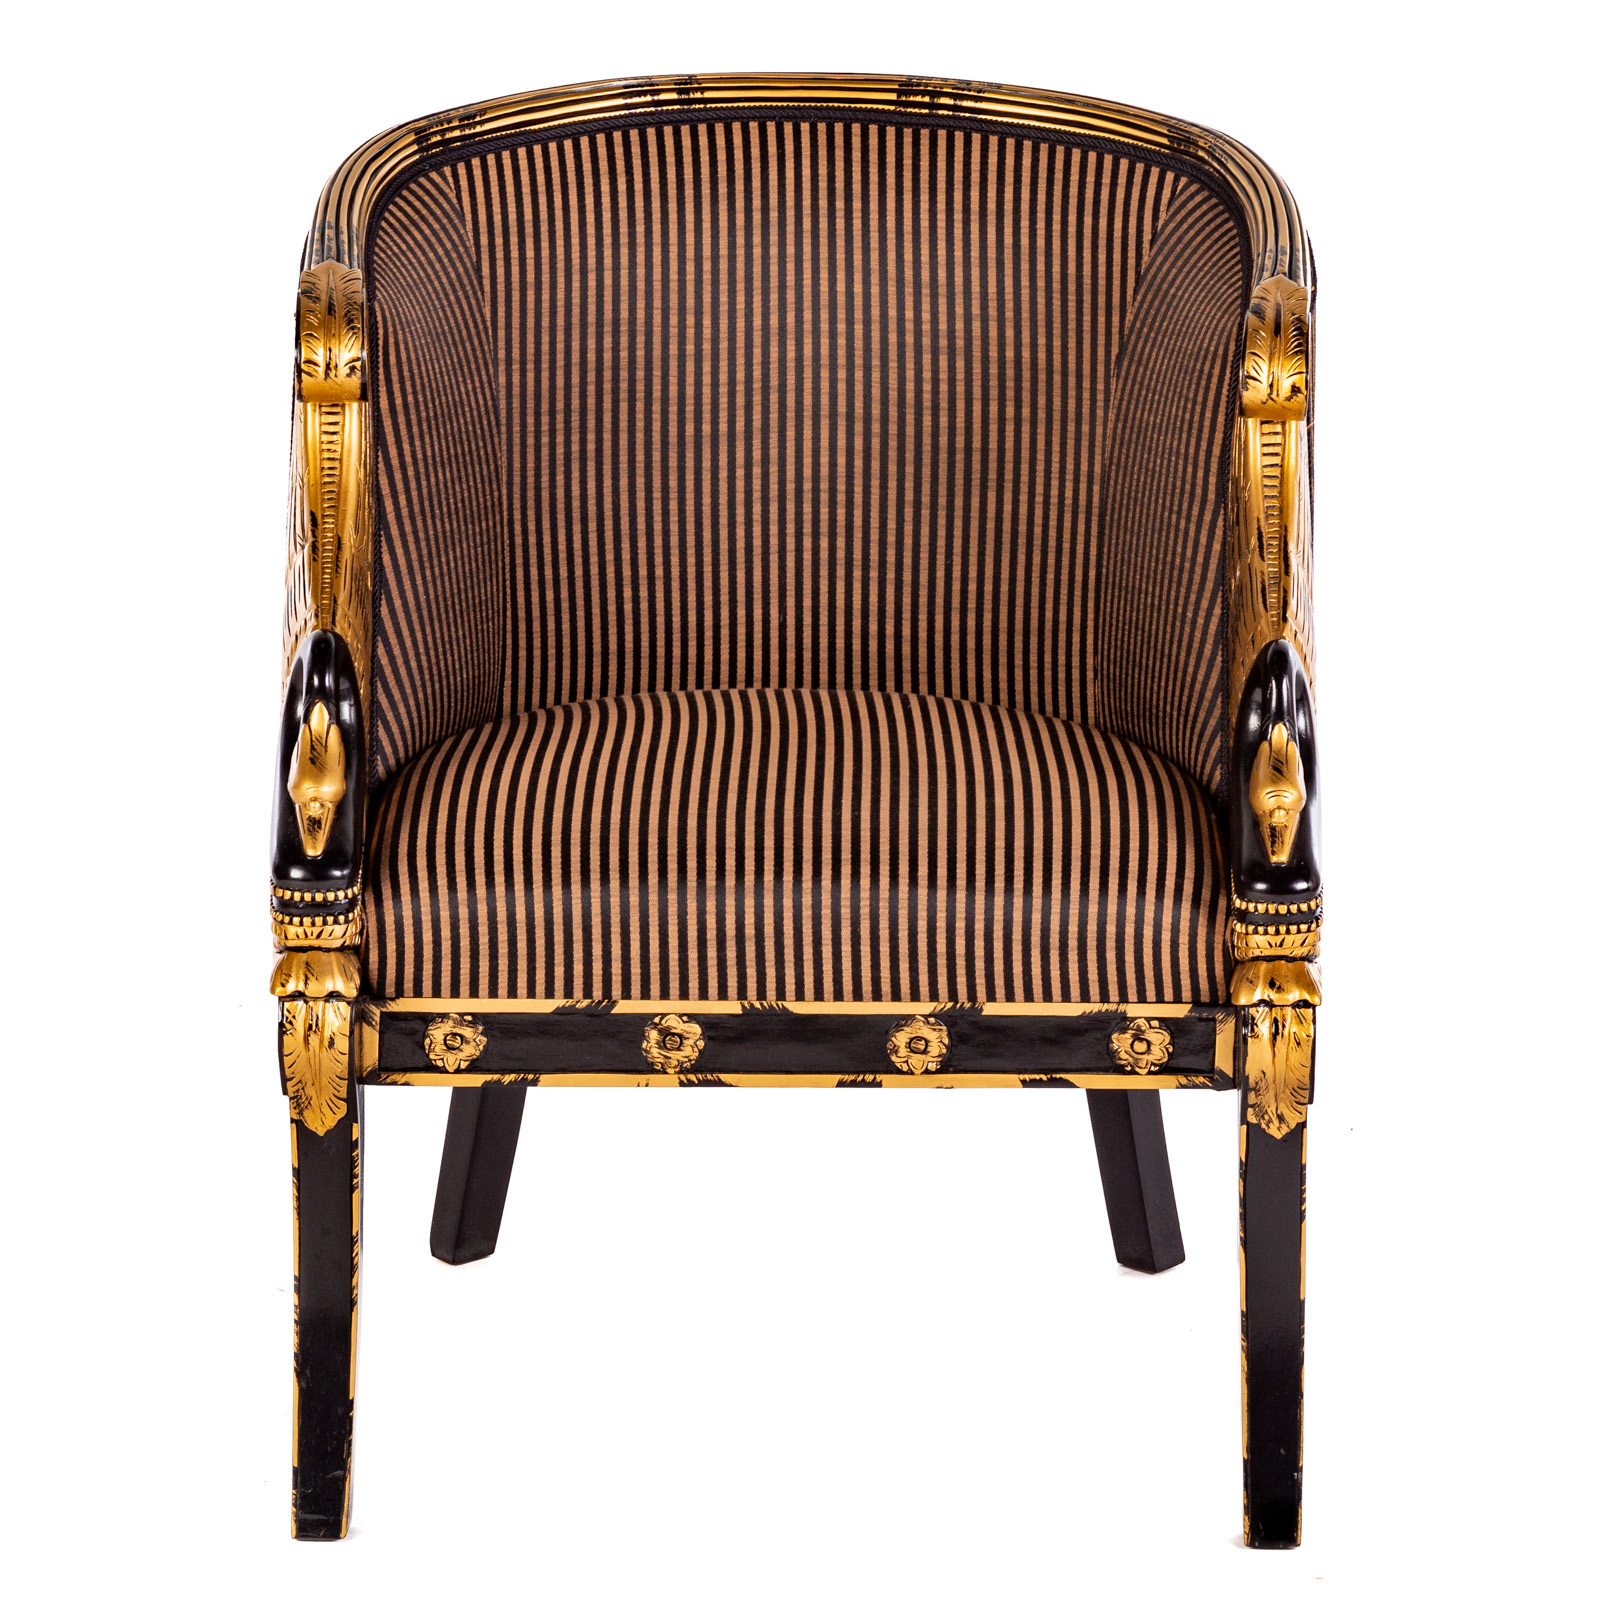 FRENCH EMPIRE STYLE TUB CHAIR 20th